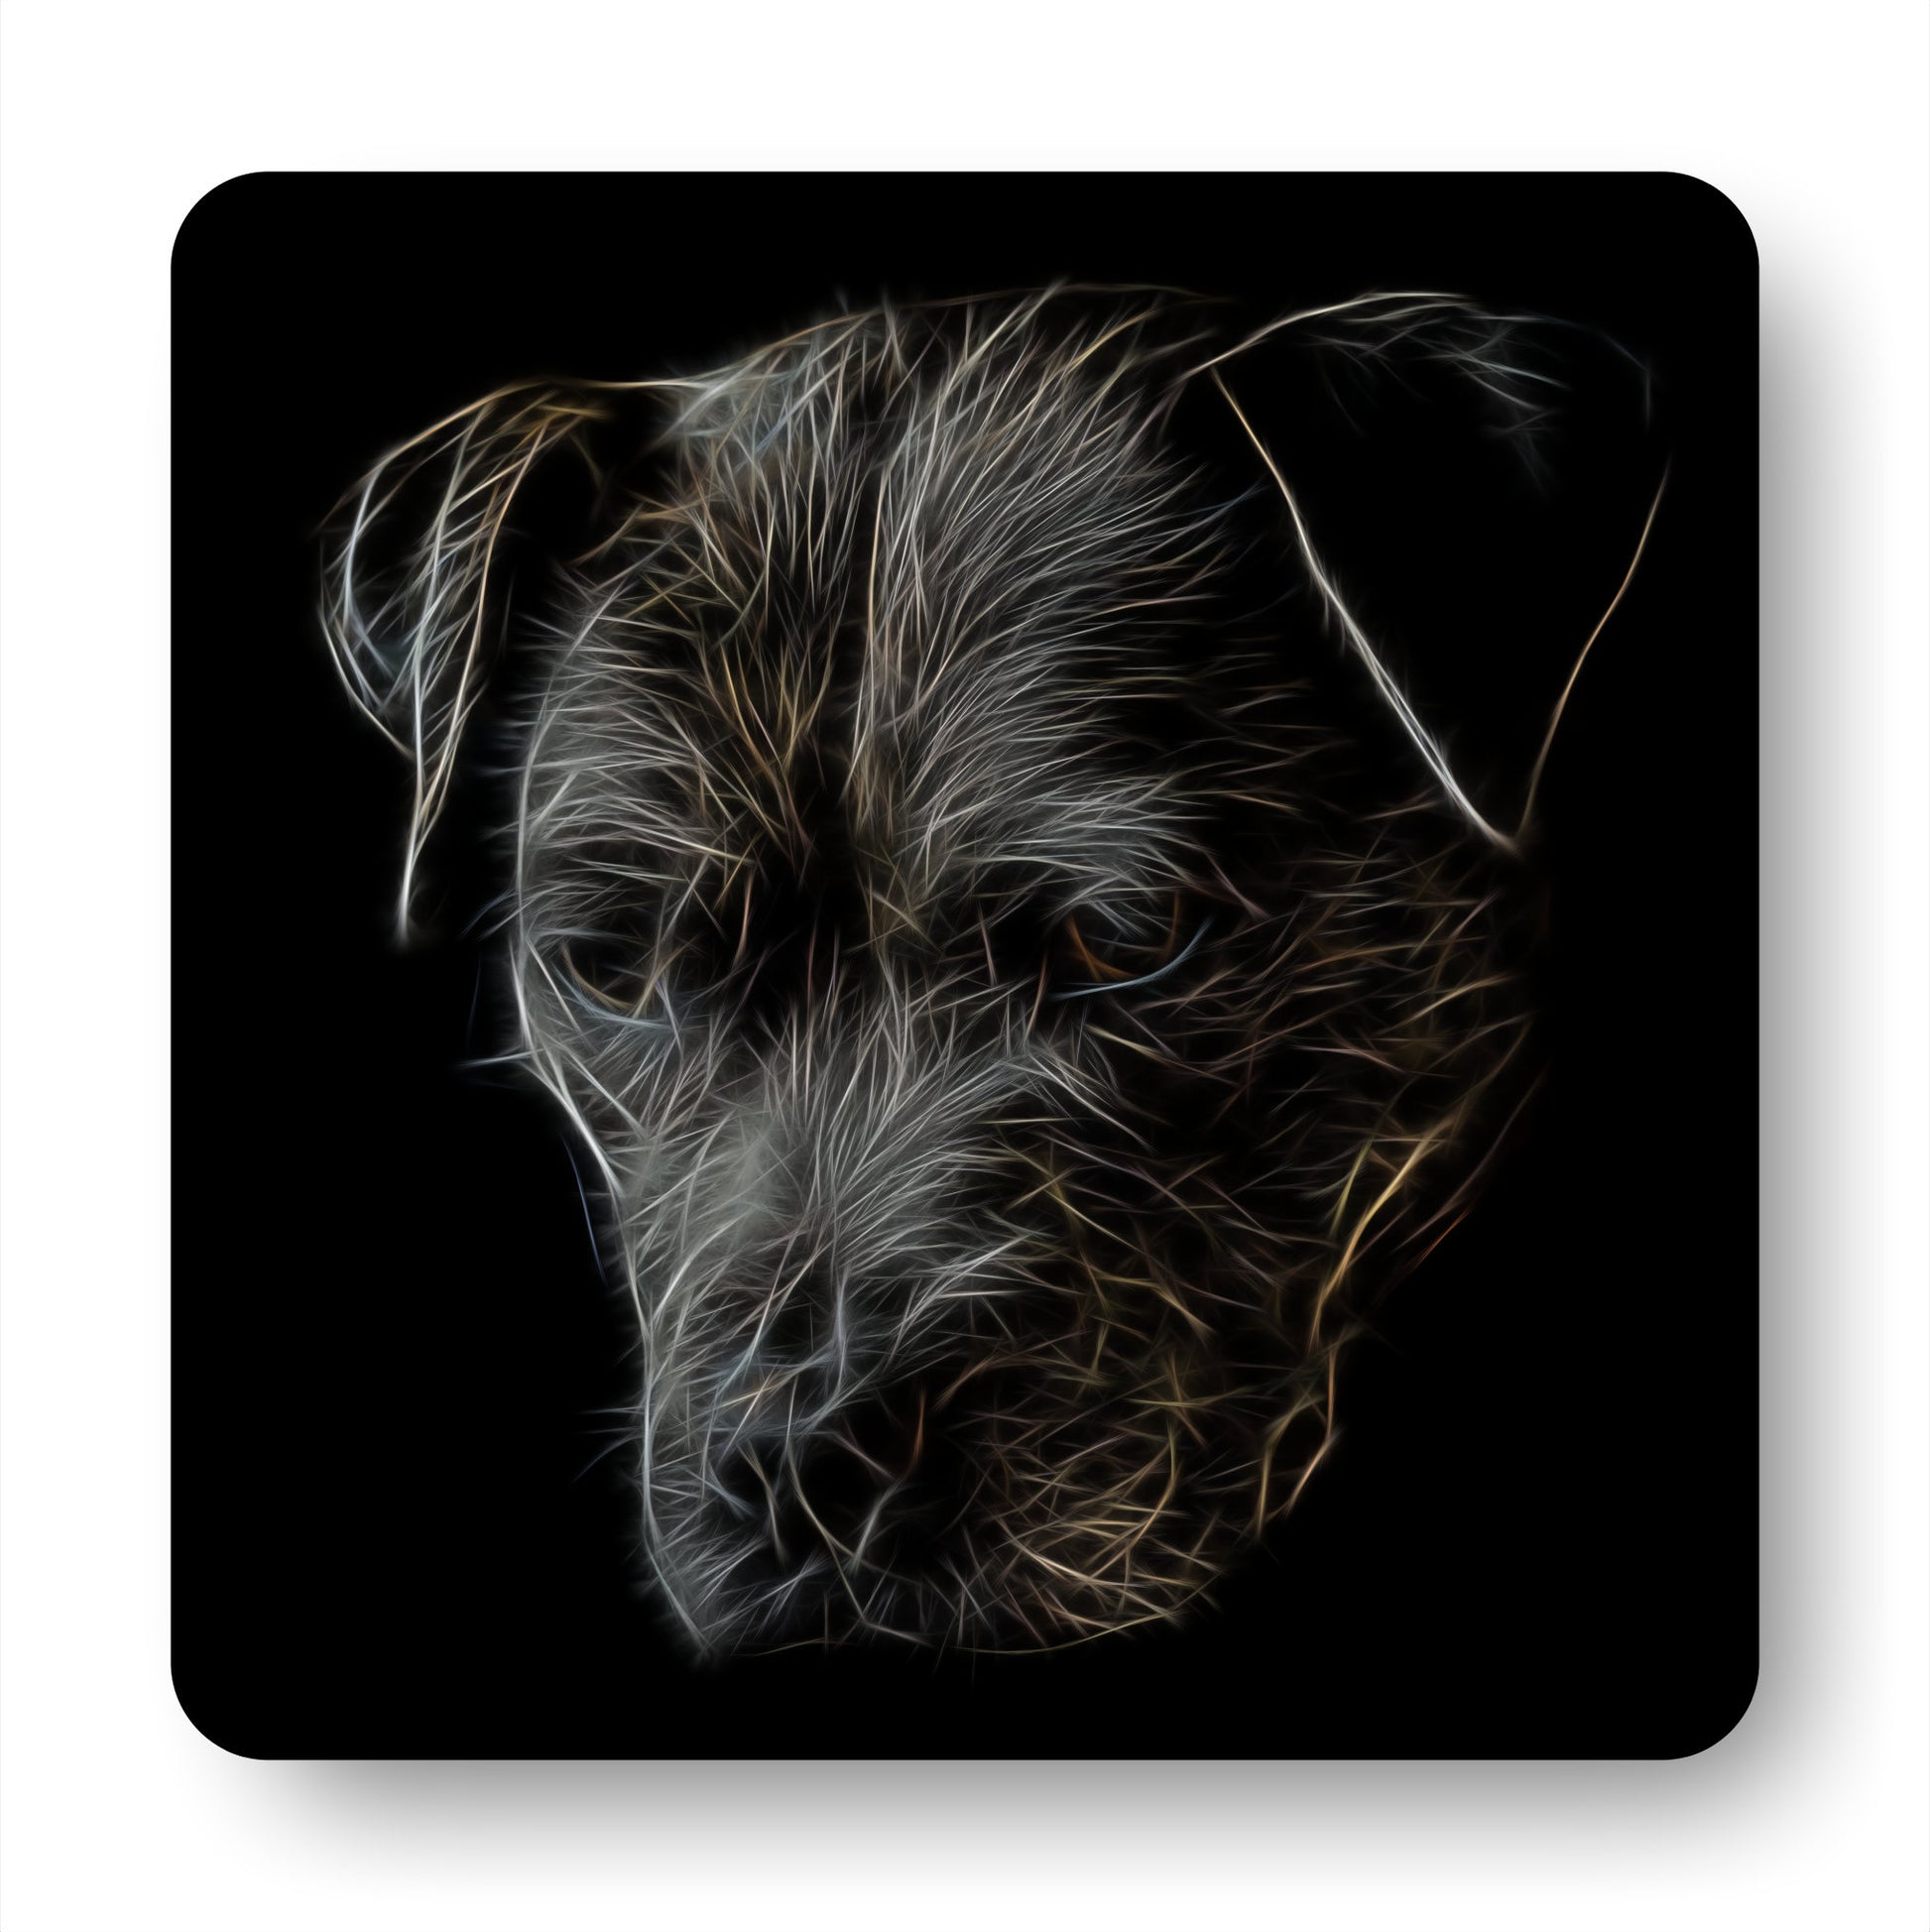 Black Staffordshire Bull Terrier Coasters, Set of 4, with Stunning Fractal Art Design. Perfect Dog Owner Gift.